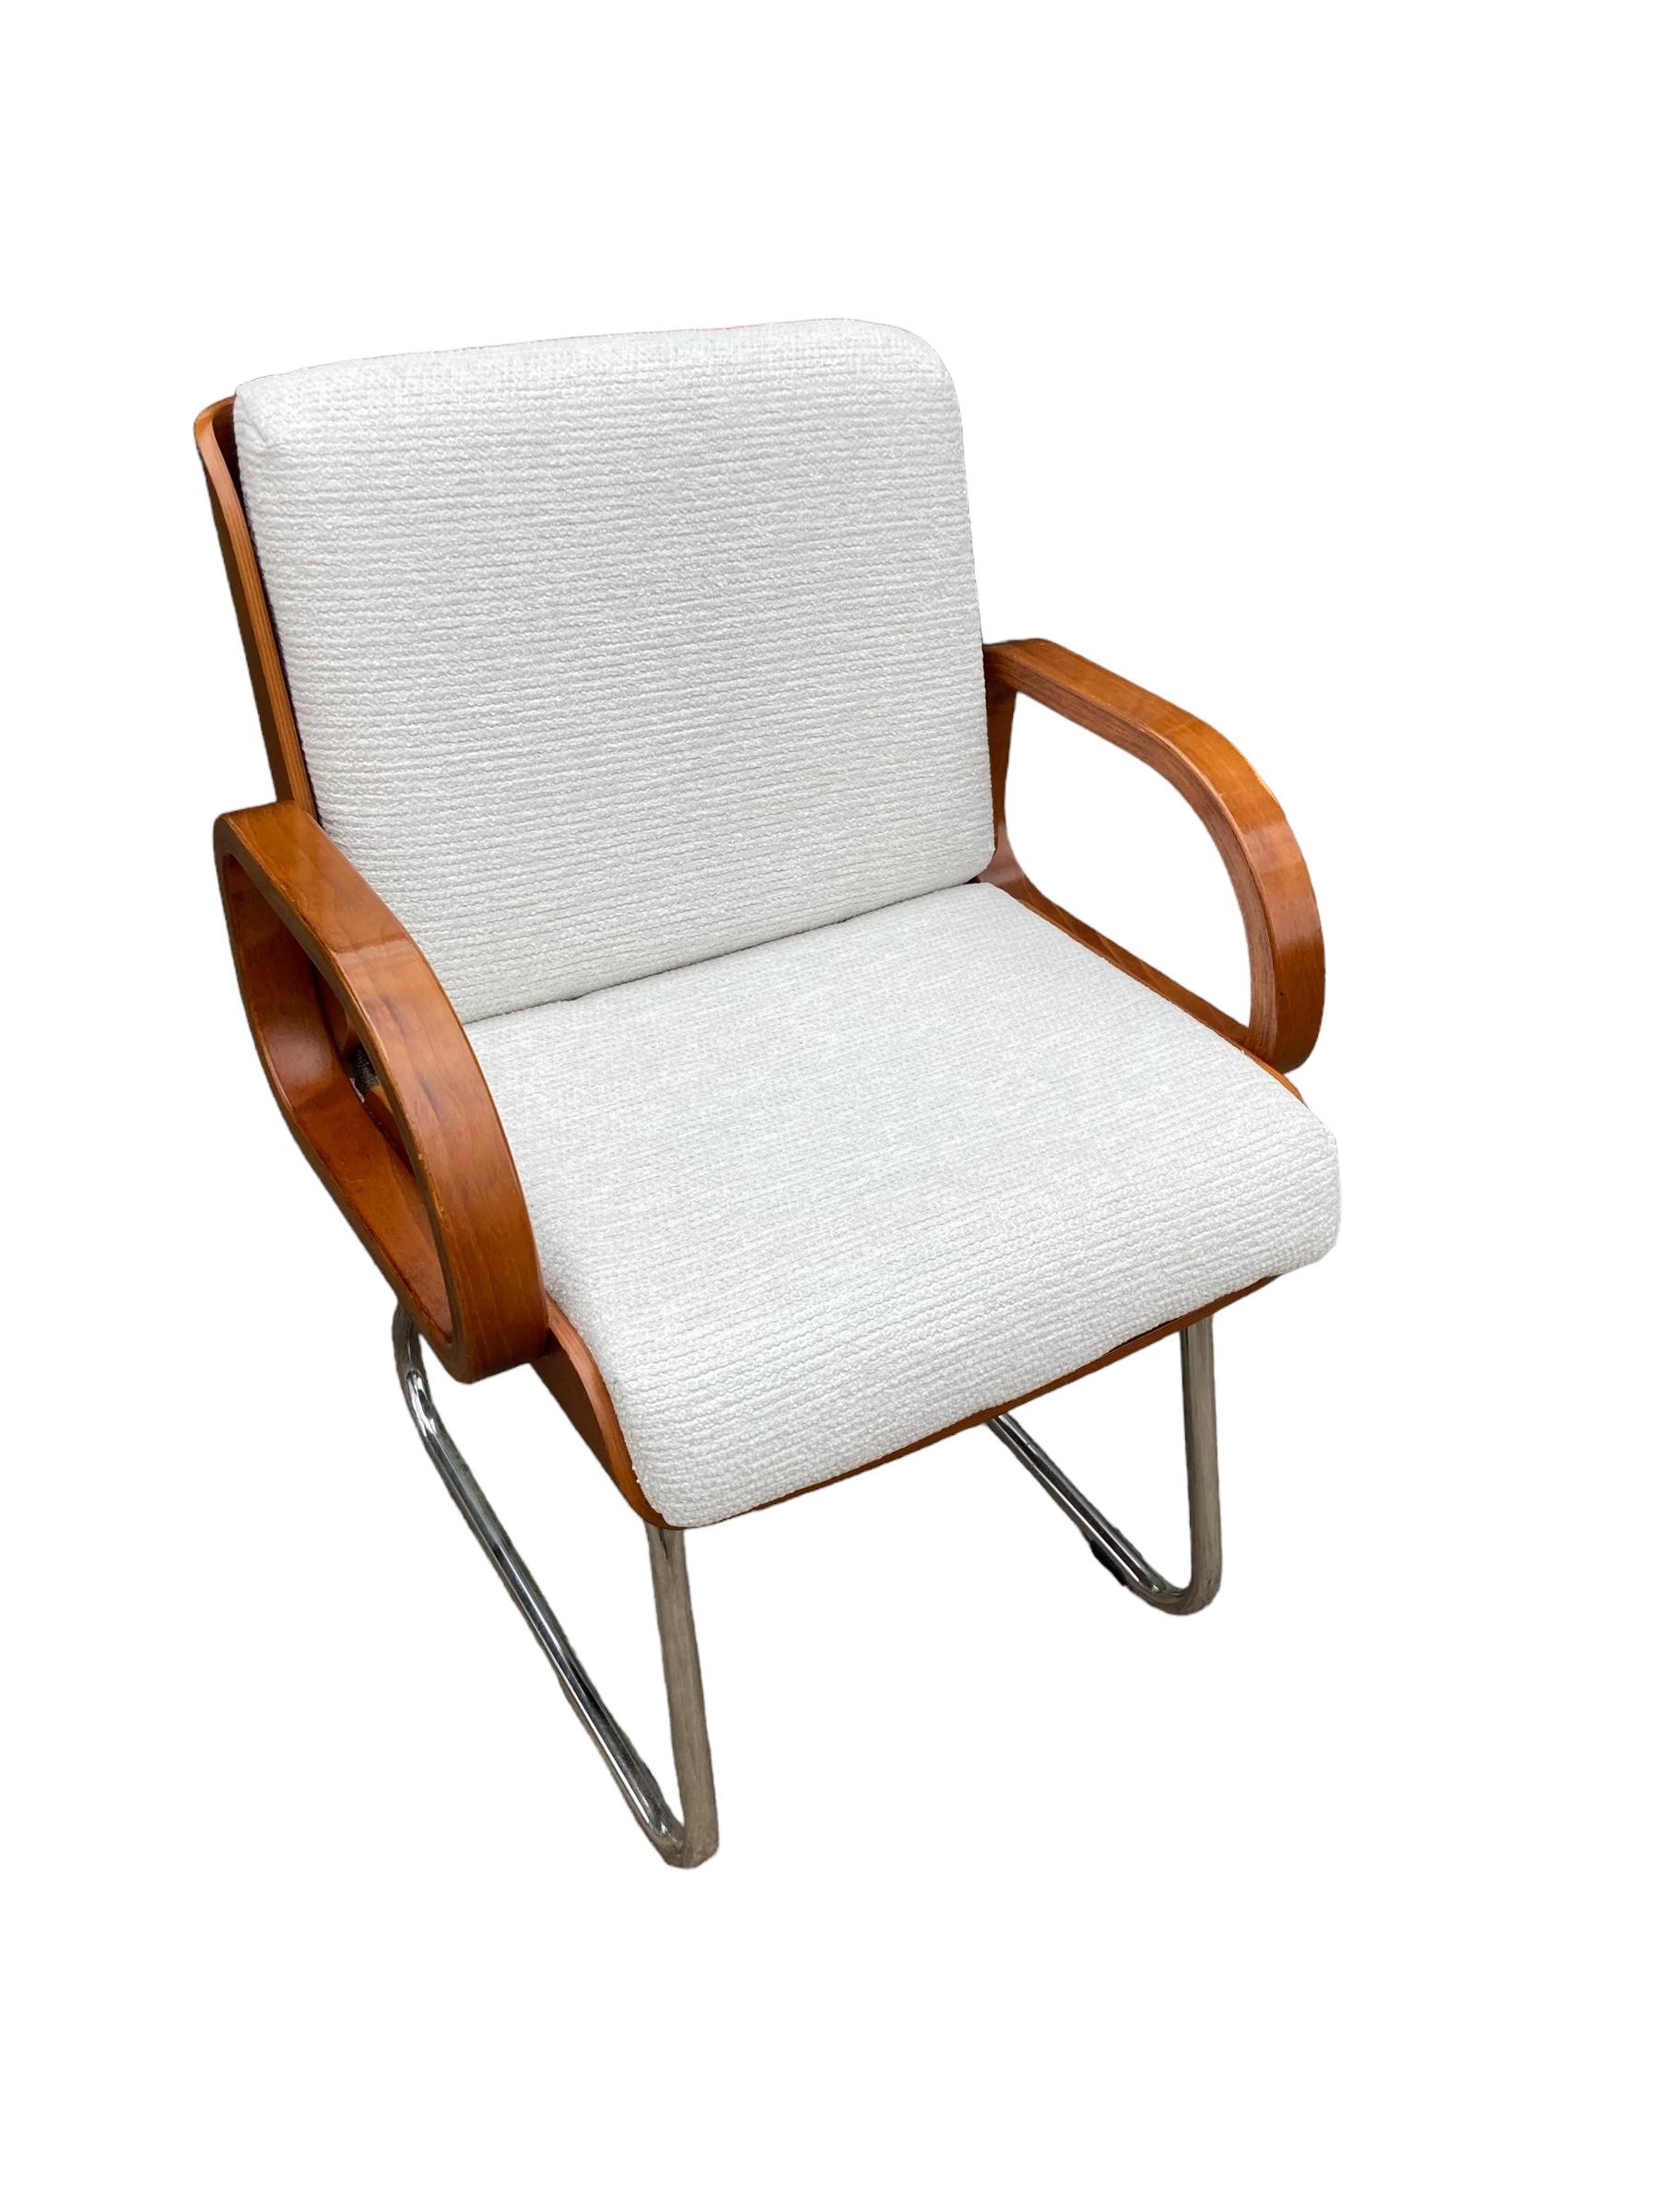 Gordon Russell Mid Century Bauhaus Style Teak and Chrome Office chair For Sale 2